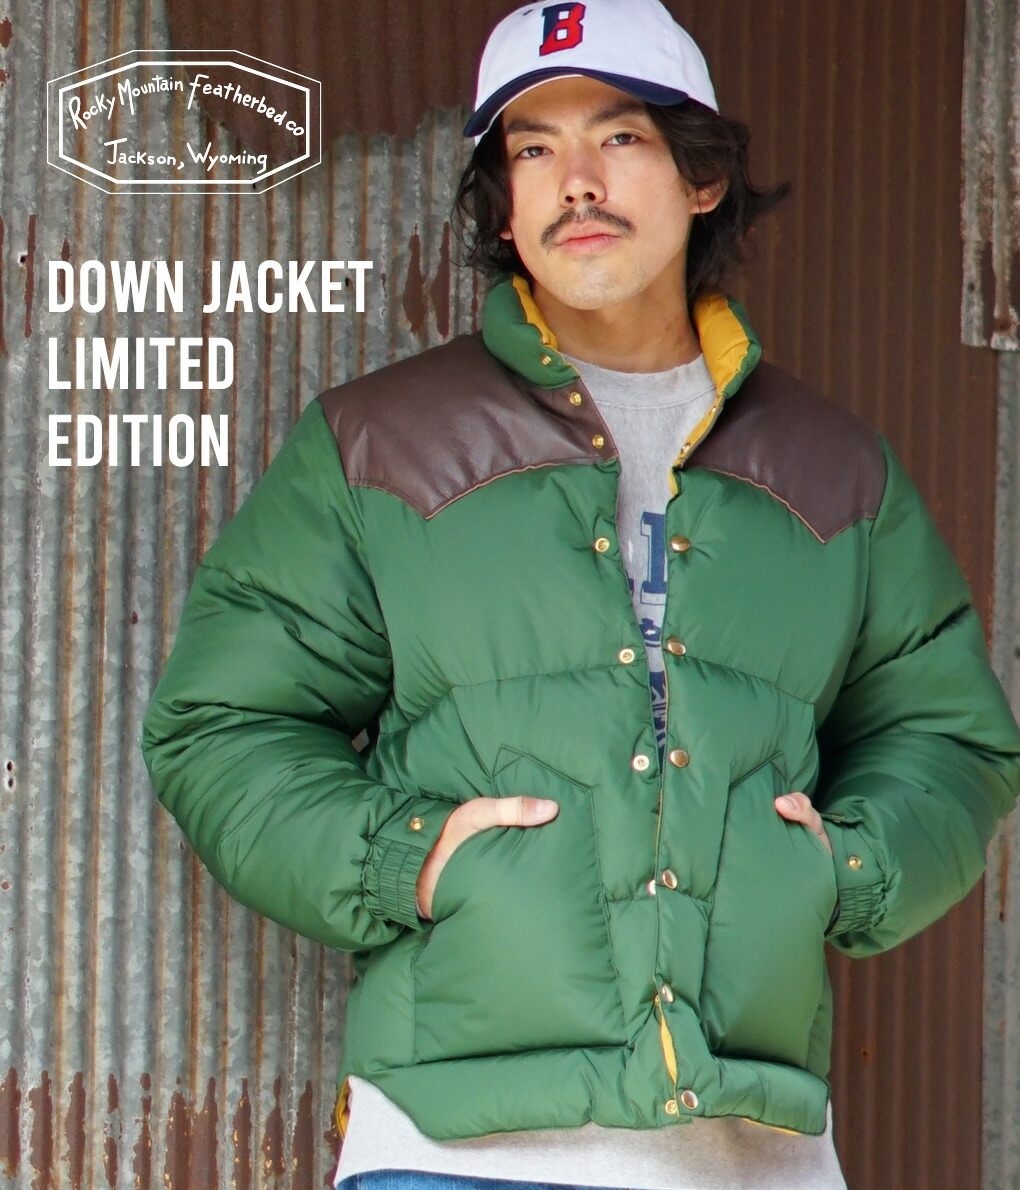 ROCKY MOUNTAIN FEATHER BED / ロッキーマウンテンフェザーベッド ： DOWN JACKET LIMITED EDITION  ： 290-222-50